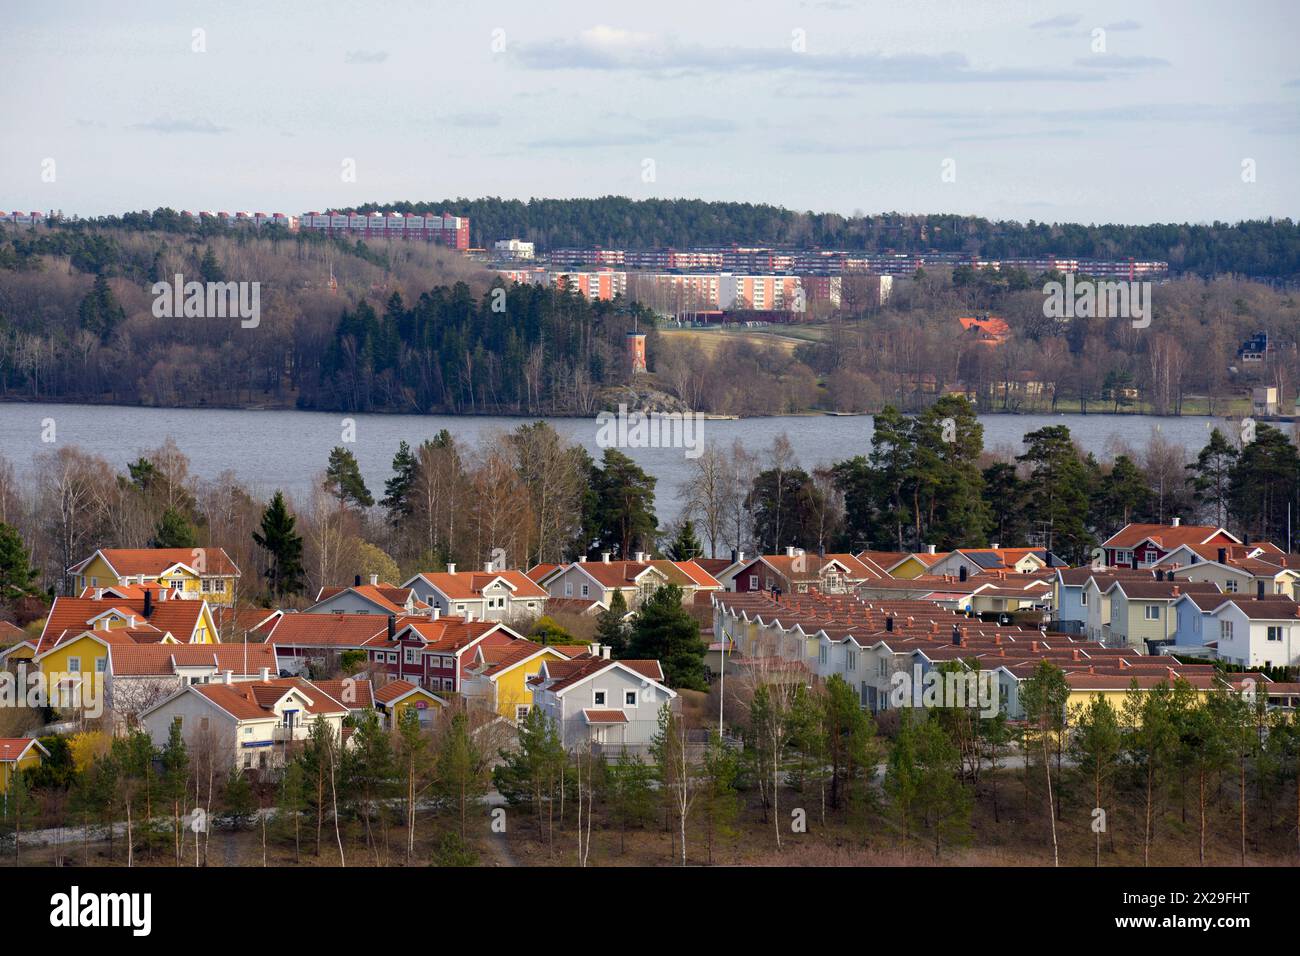 Homes with Pond. Scene of prime real estate community in Stockholm area Stock Photo